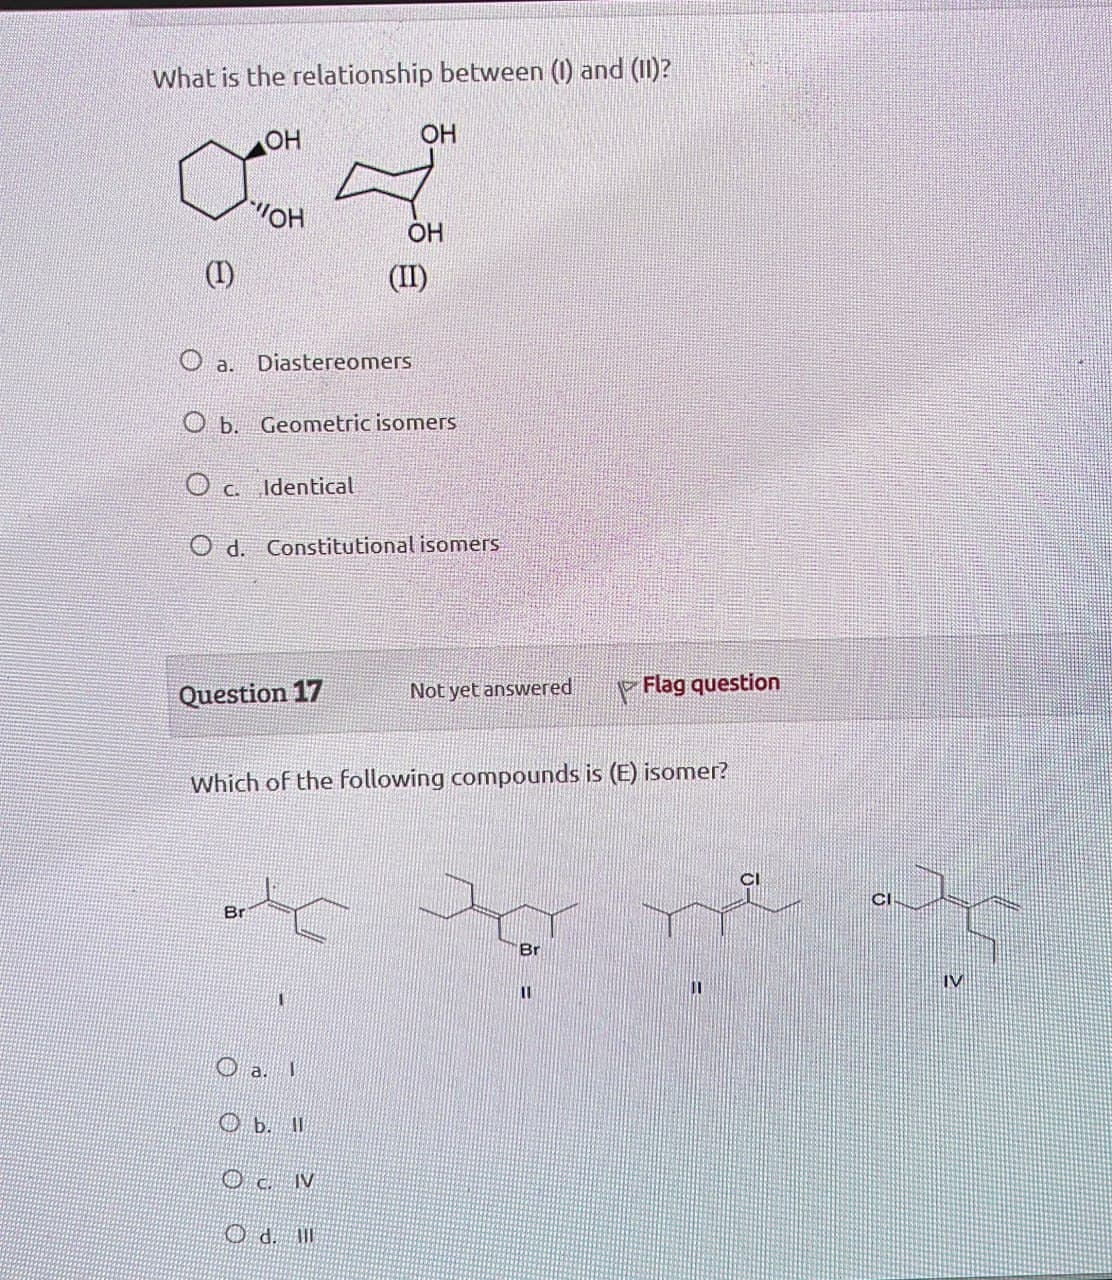 What is the relationship between (1) and (II)?
о
OH
OH
OH
OH
(II)
(I)
O a. Diastereomers
Ob. Geometric isomers
О с. Identical
Od. Constitutional isomers
Question 17
Not yet answered
Flag question
Which of the following compounds is (E) isomer?
Br
Br
IV
11
O a. I
OC. IV
PO